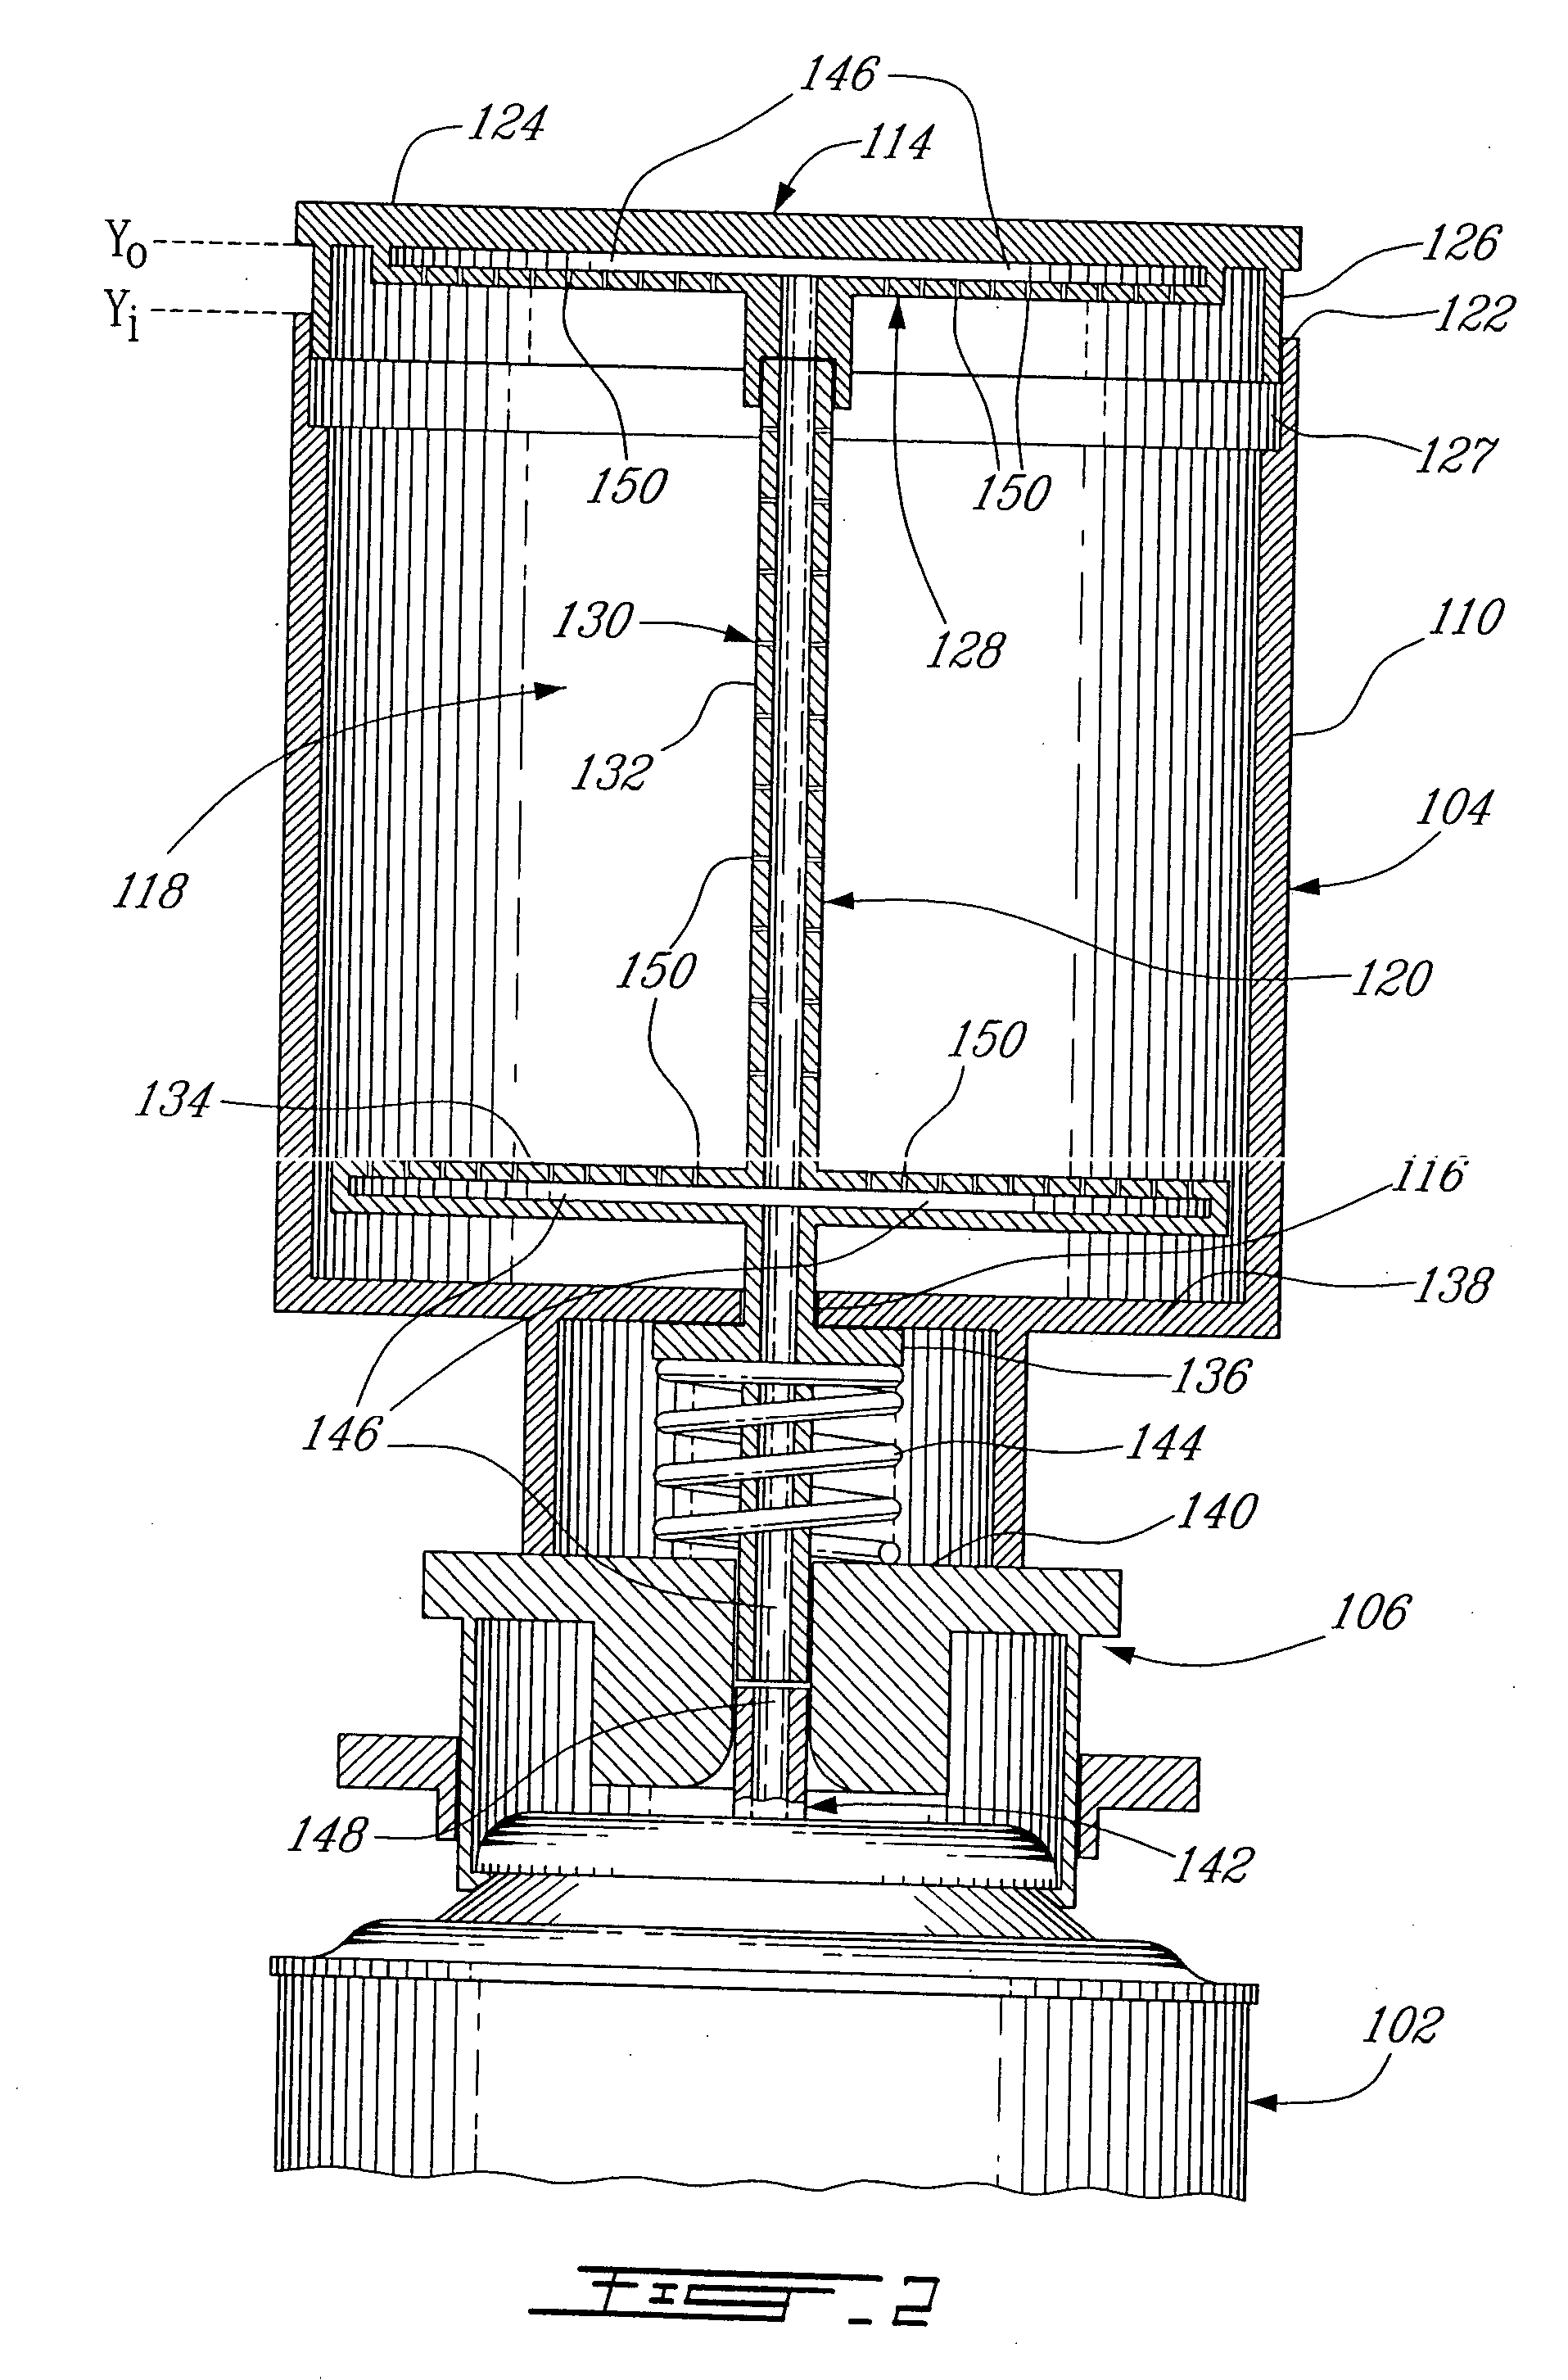 Bandage cooling apparatus and method of using same